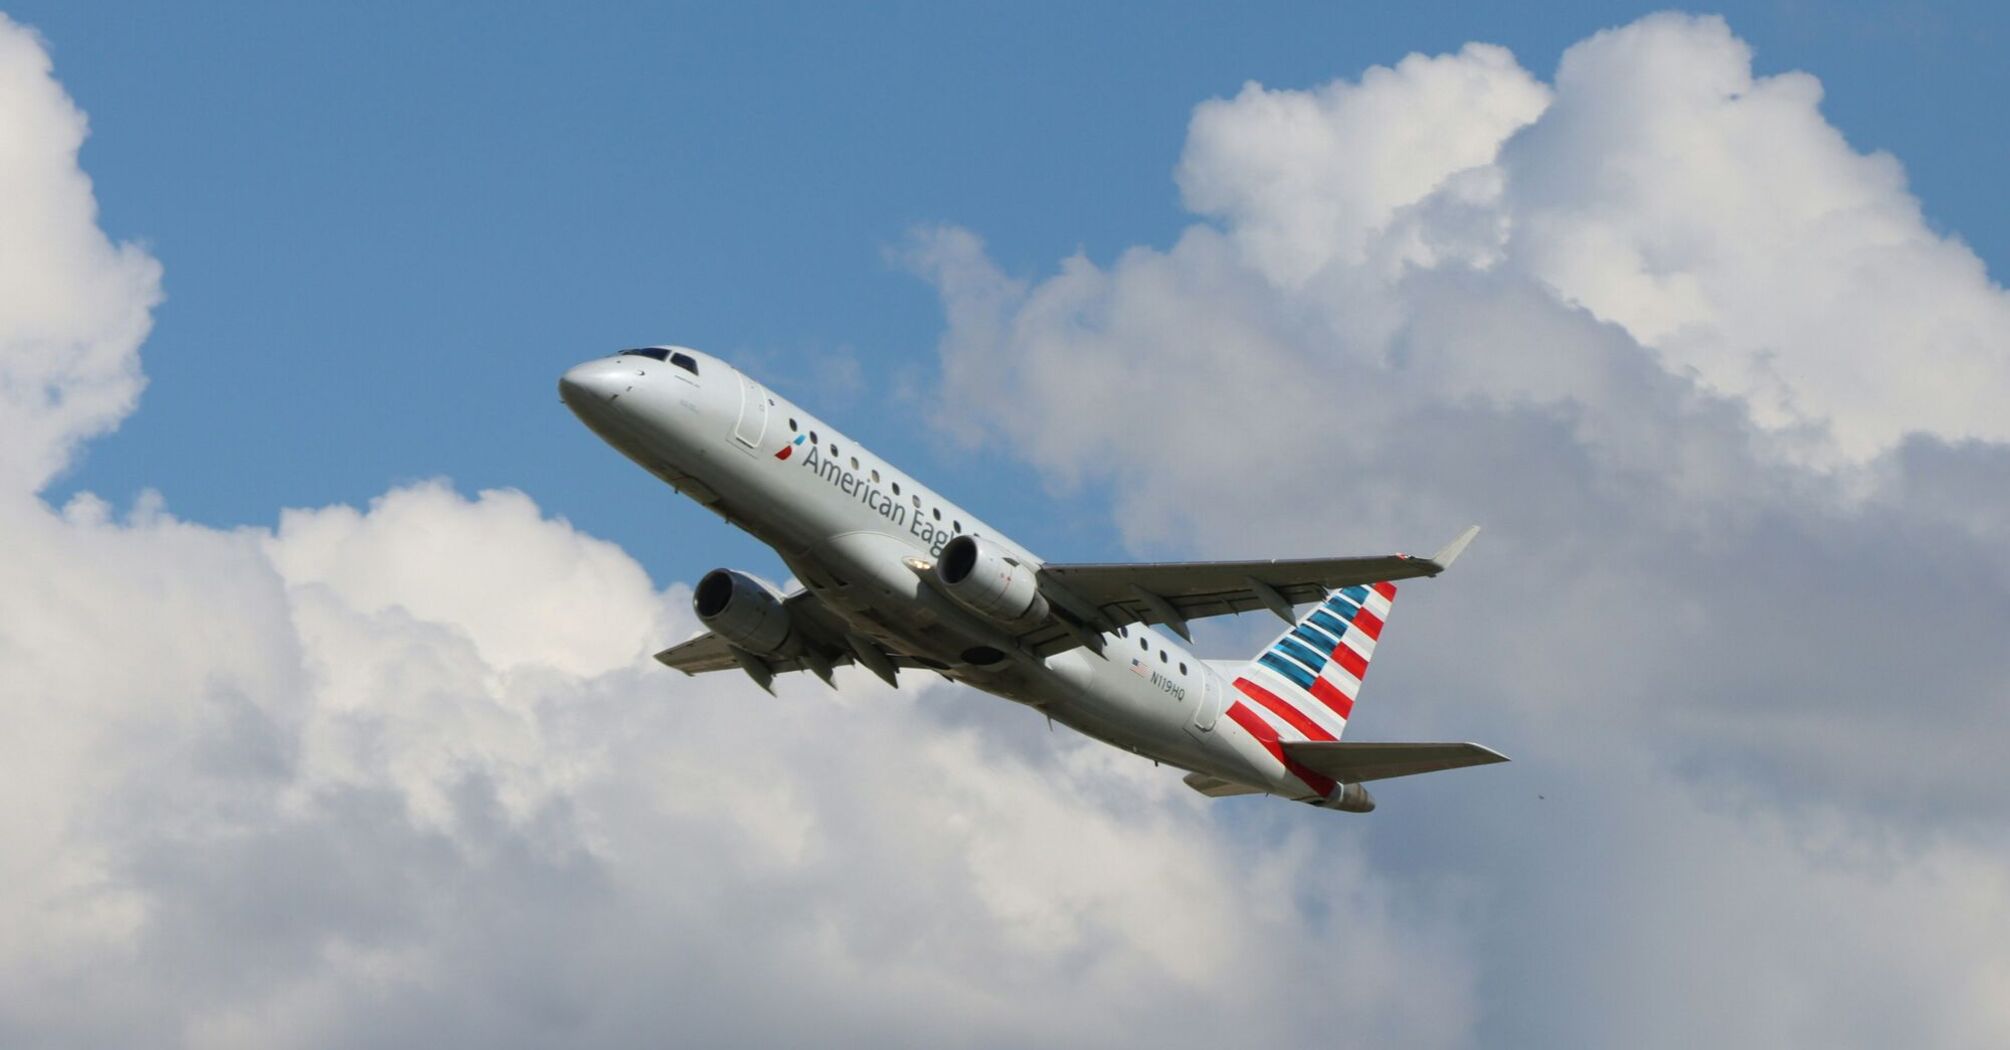 a large American Airlines passenger jet flying through a cloudy blue sky